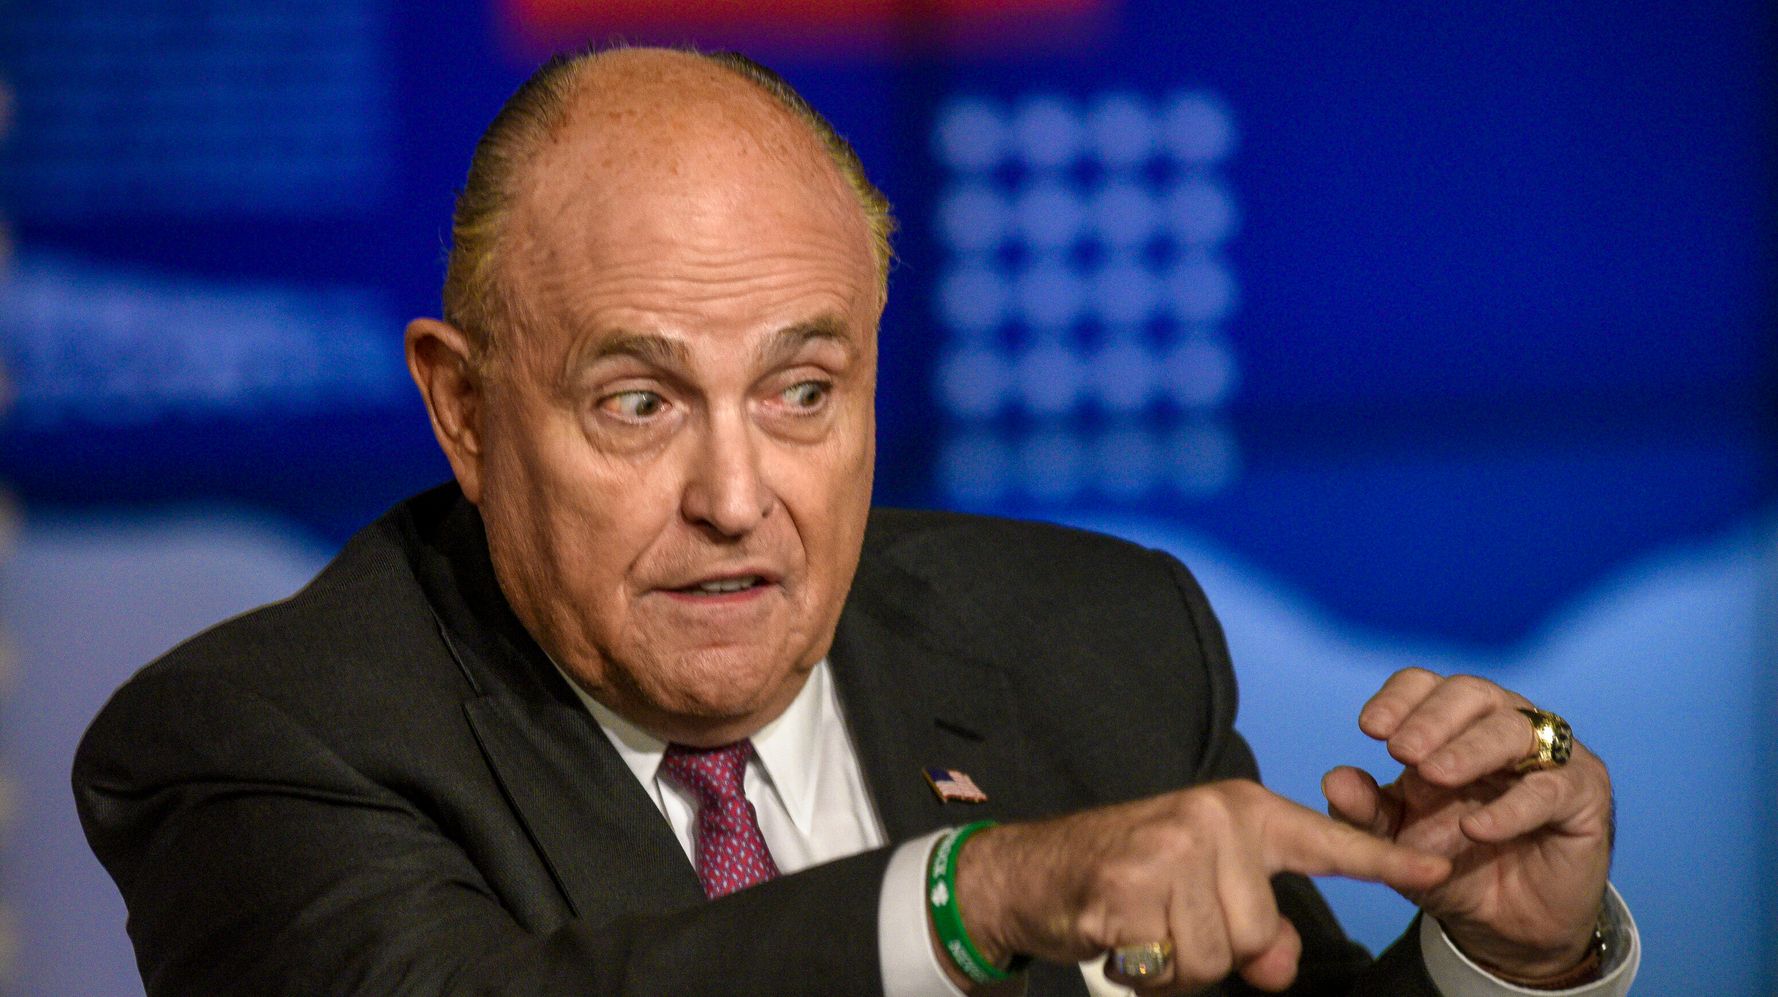 The Feds Seized Rudy Giuliani's Cell Phone And Everyone Cracked The Same Jokes